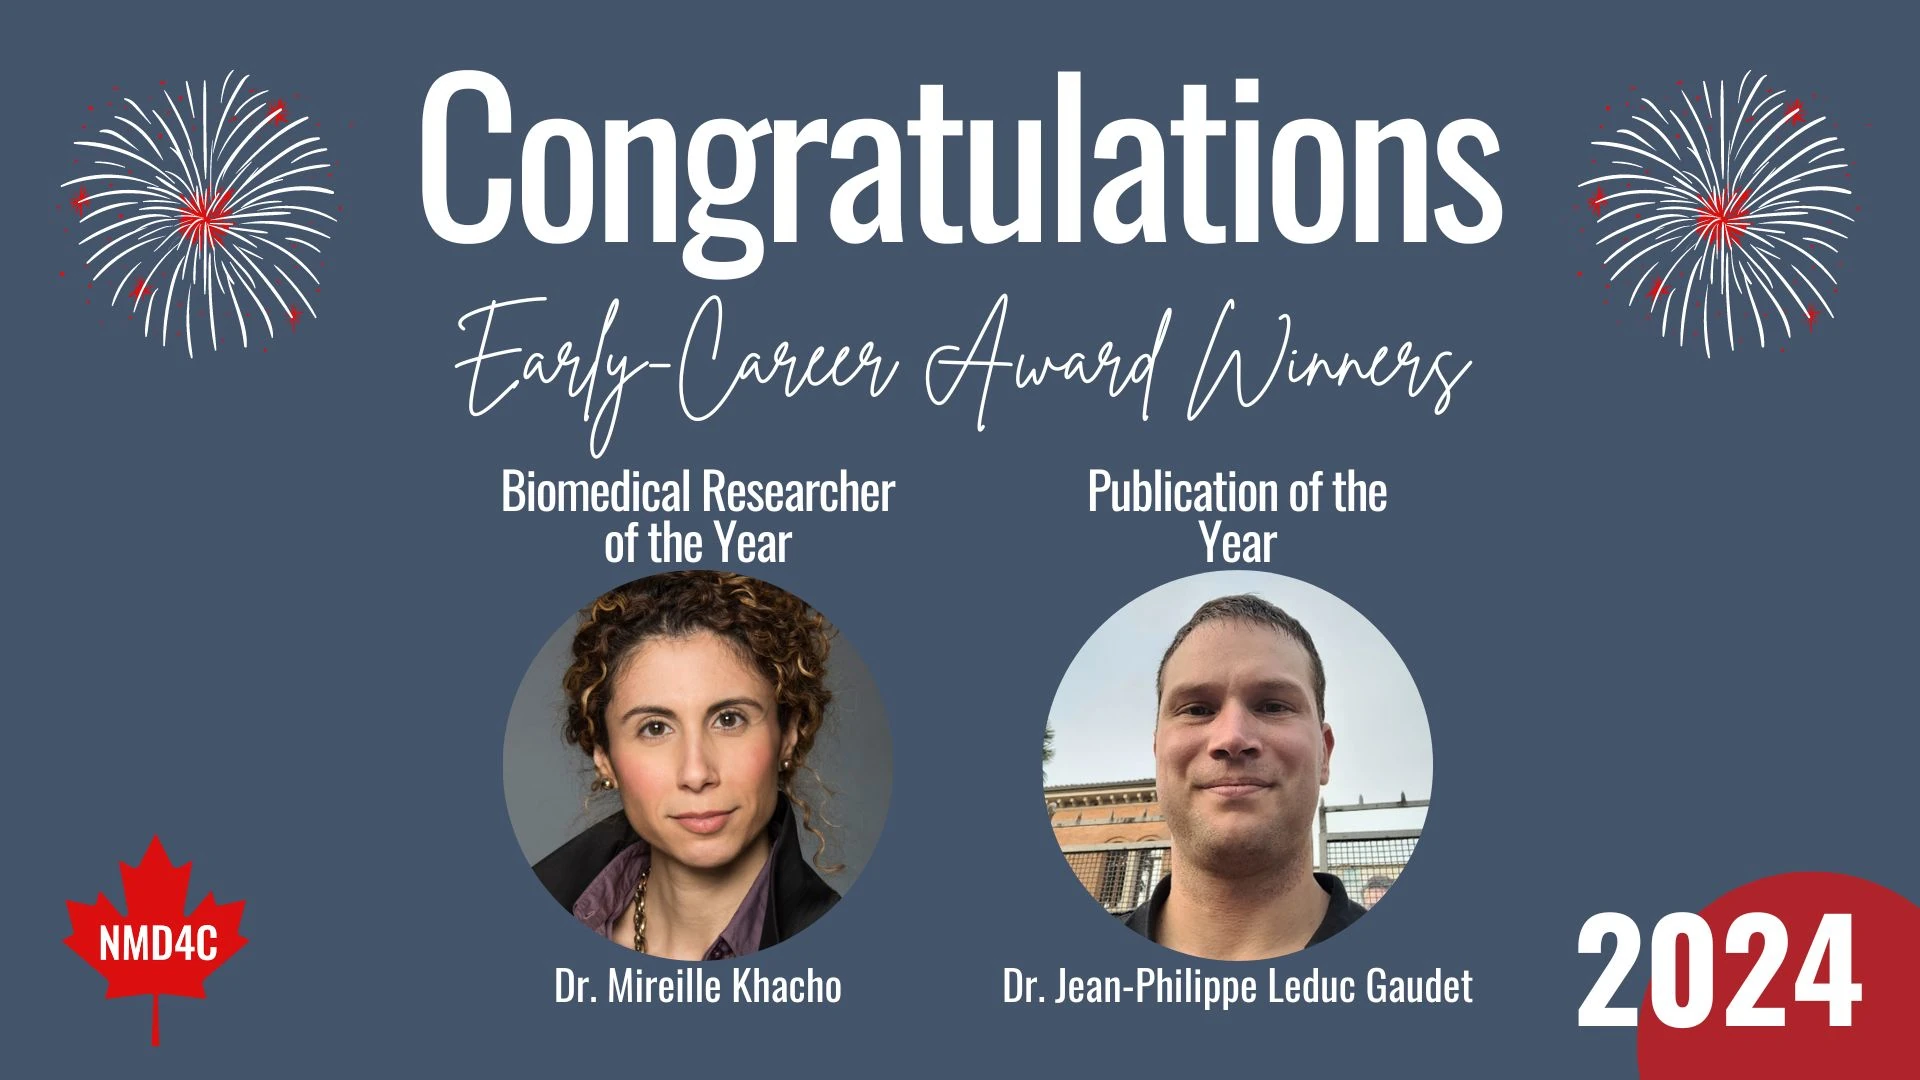 Congratulations to the 2024 early career award winners. Dr Mireille Khacho and Dr Jean-Philippe Leduc Gaudet.